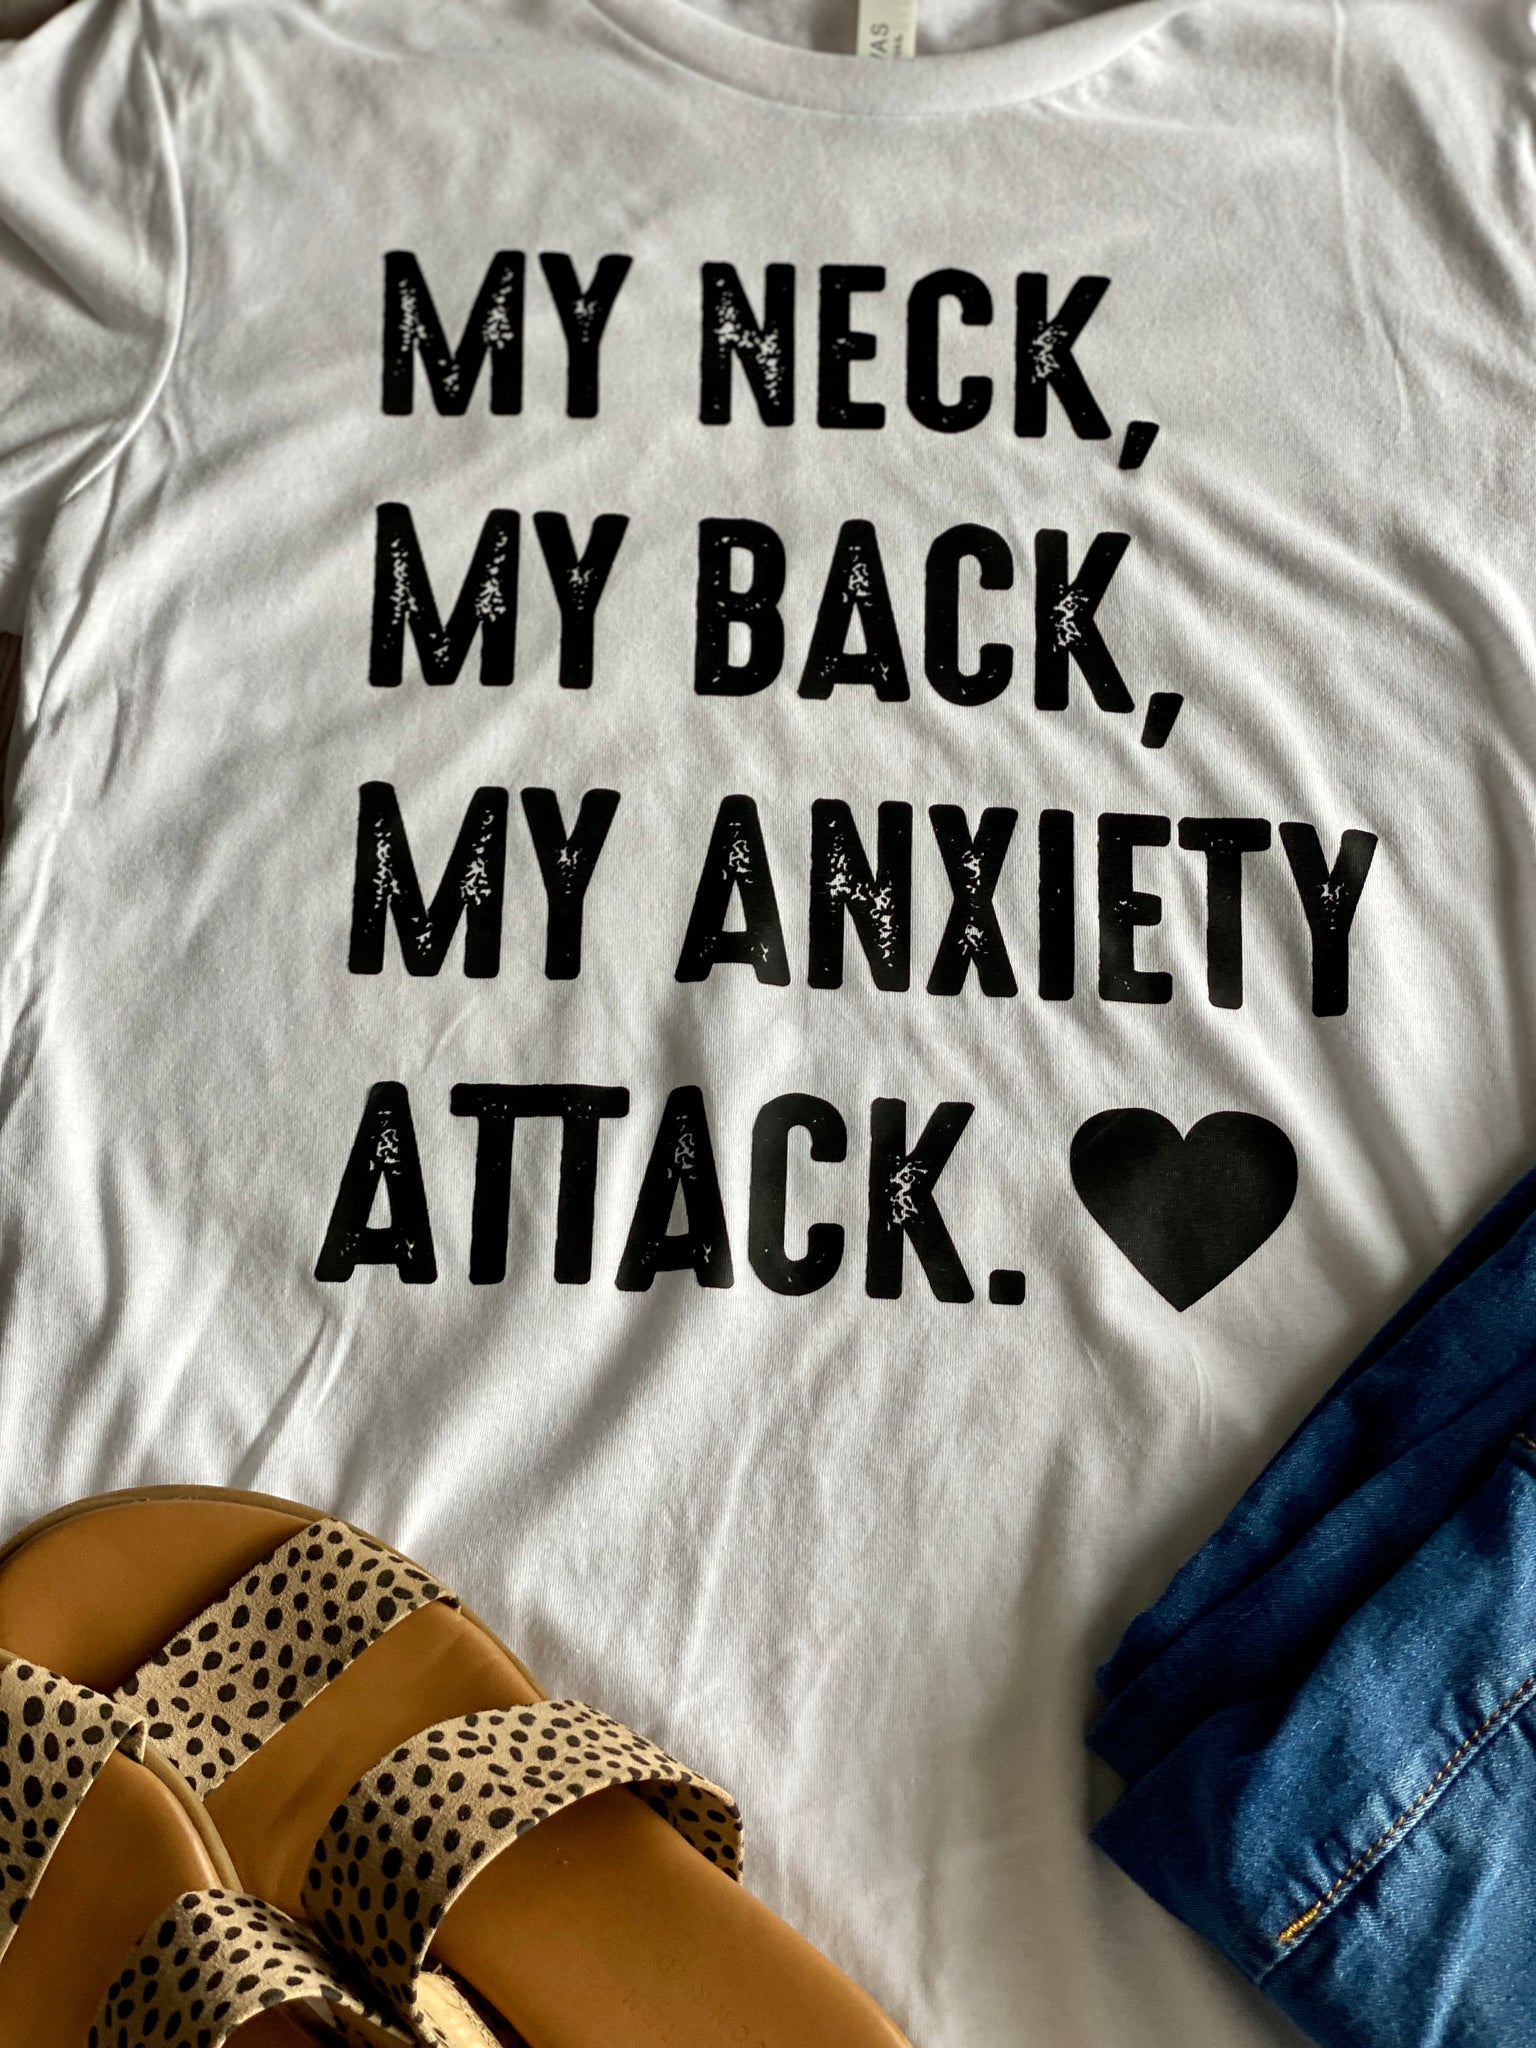 My Neck My Back My Anxiety Attack Shirt